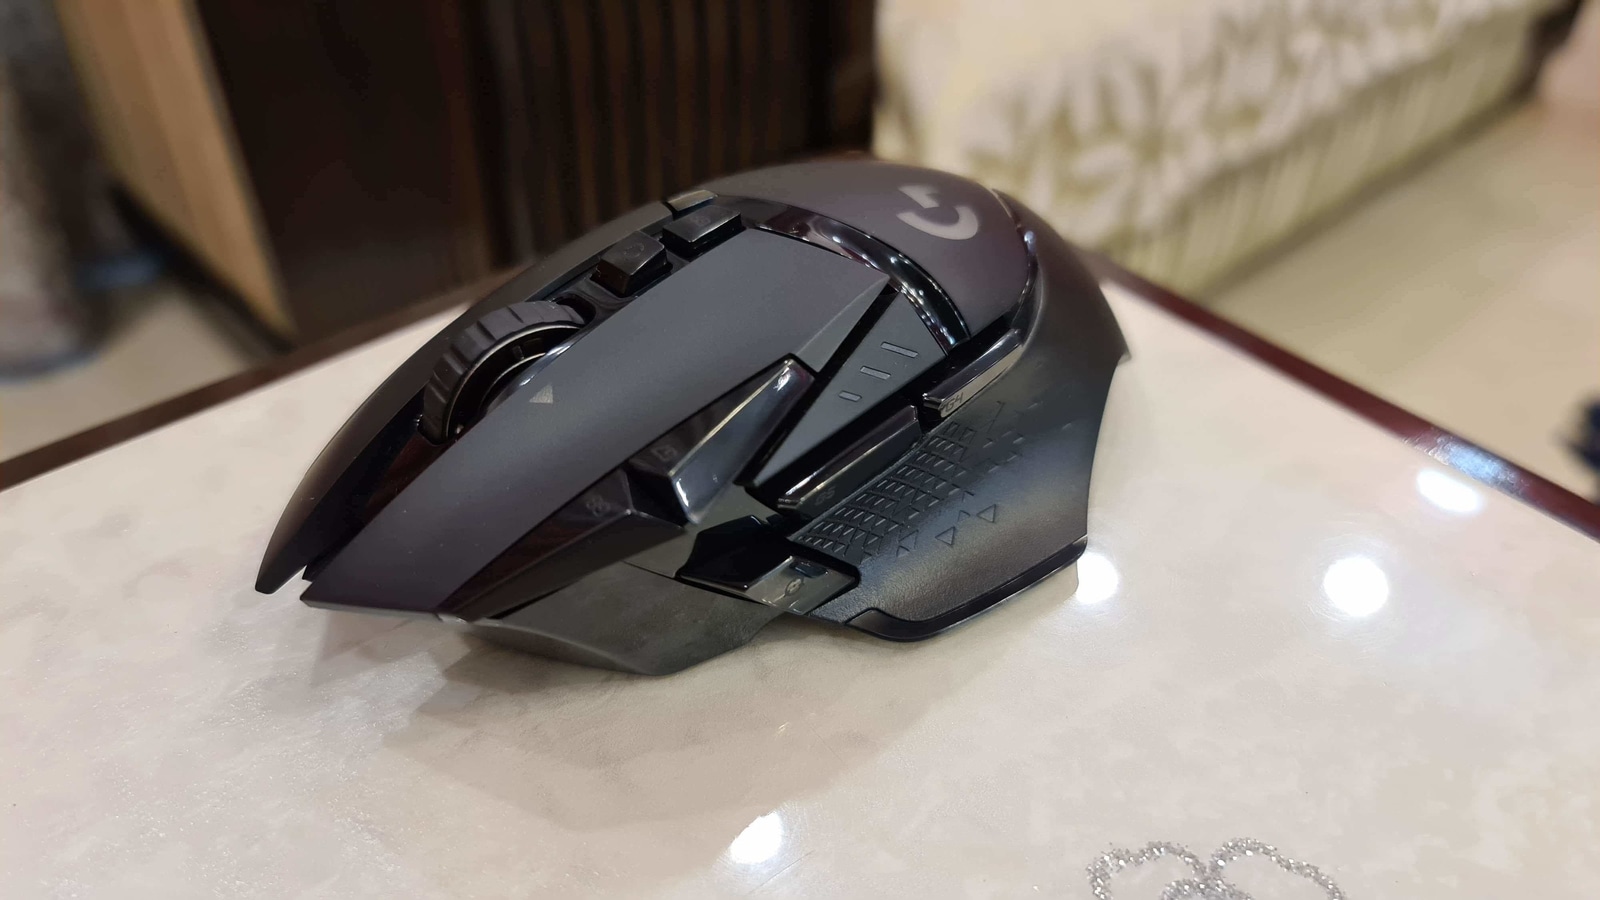 Logitech G502 Lightspeed Review: The Perfect Gaming Mouse Goes